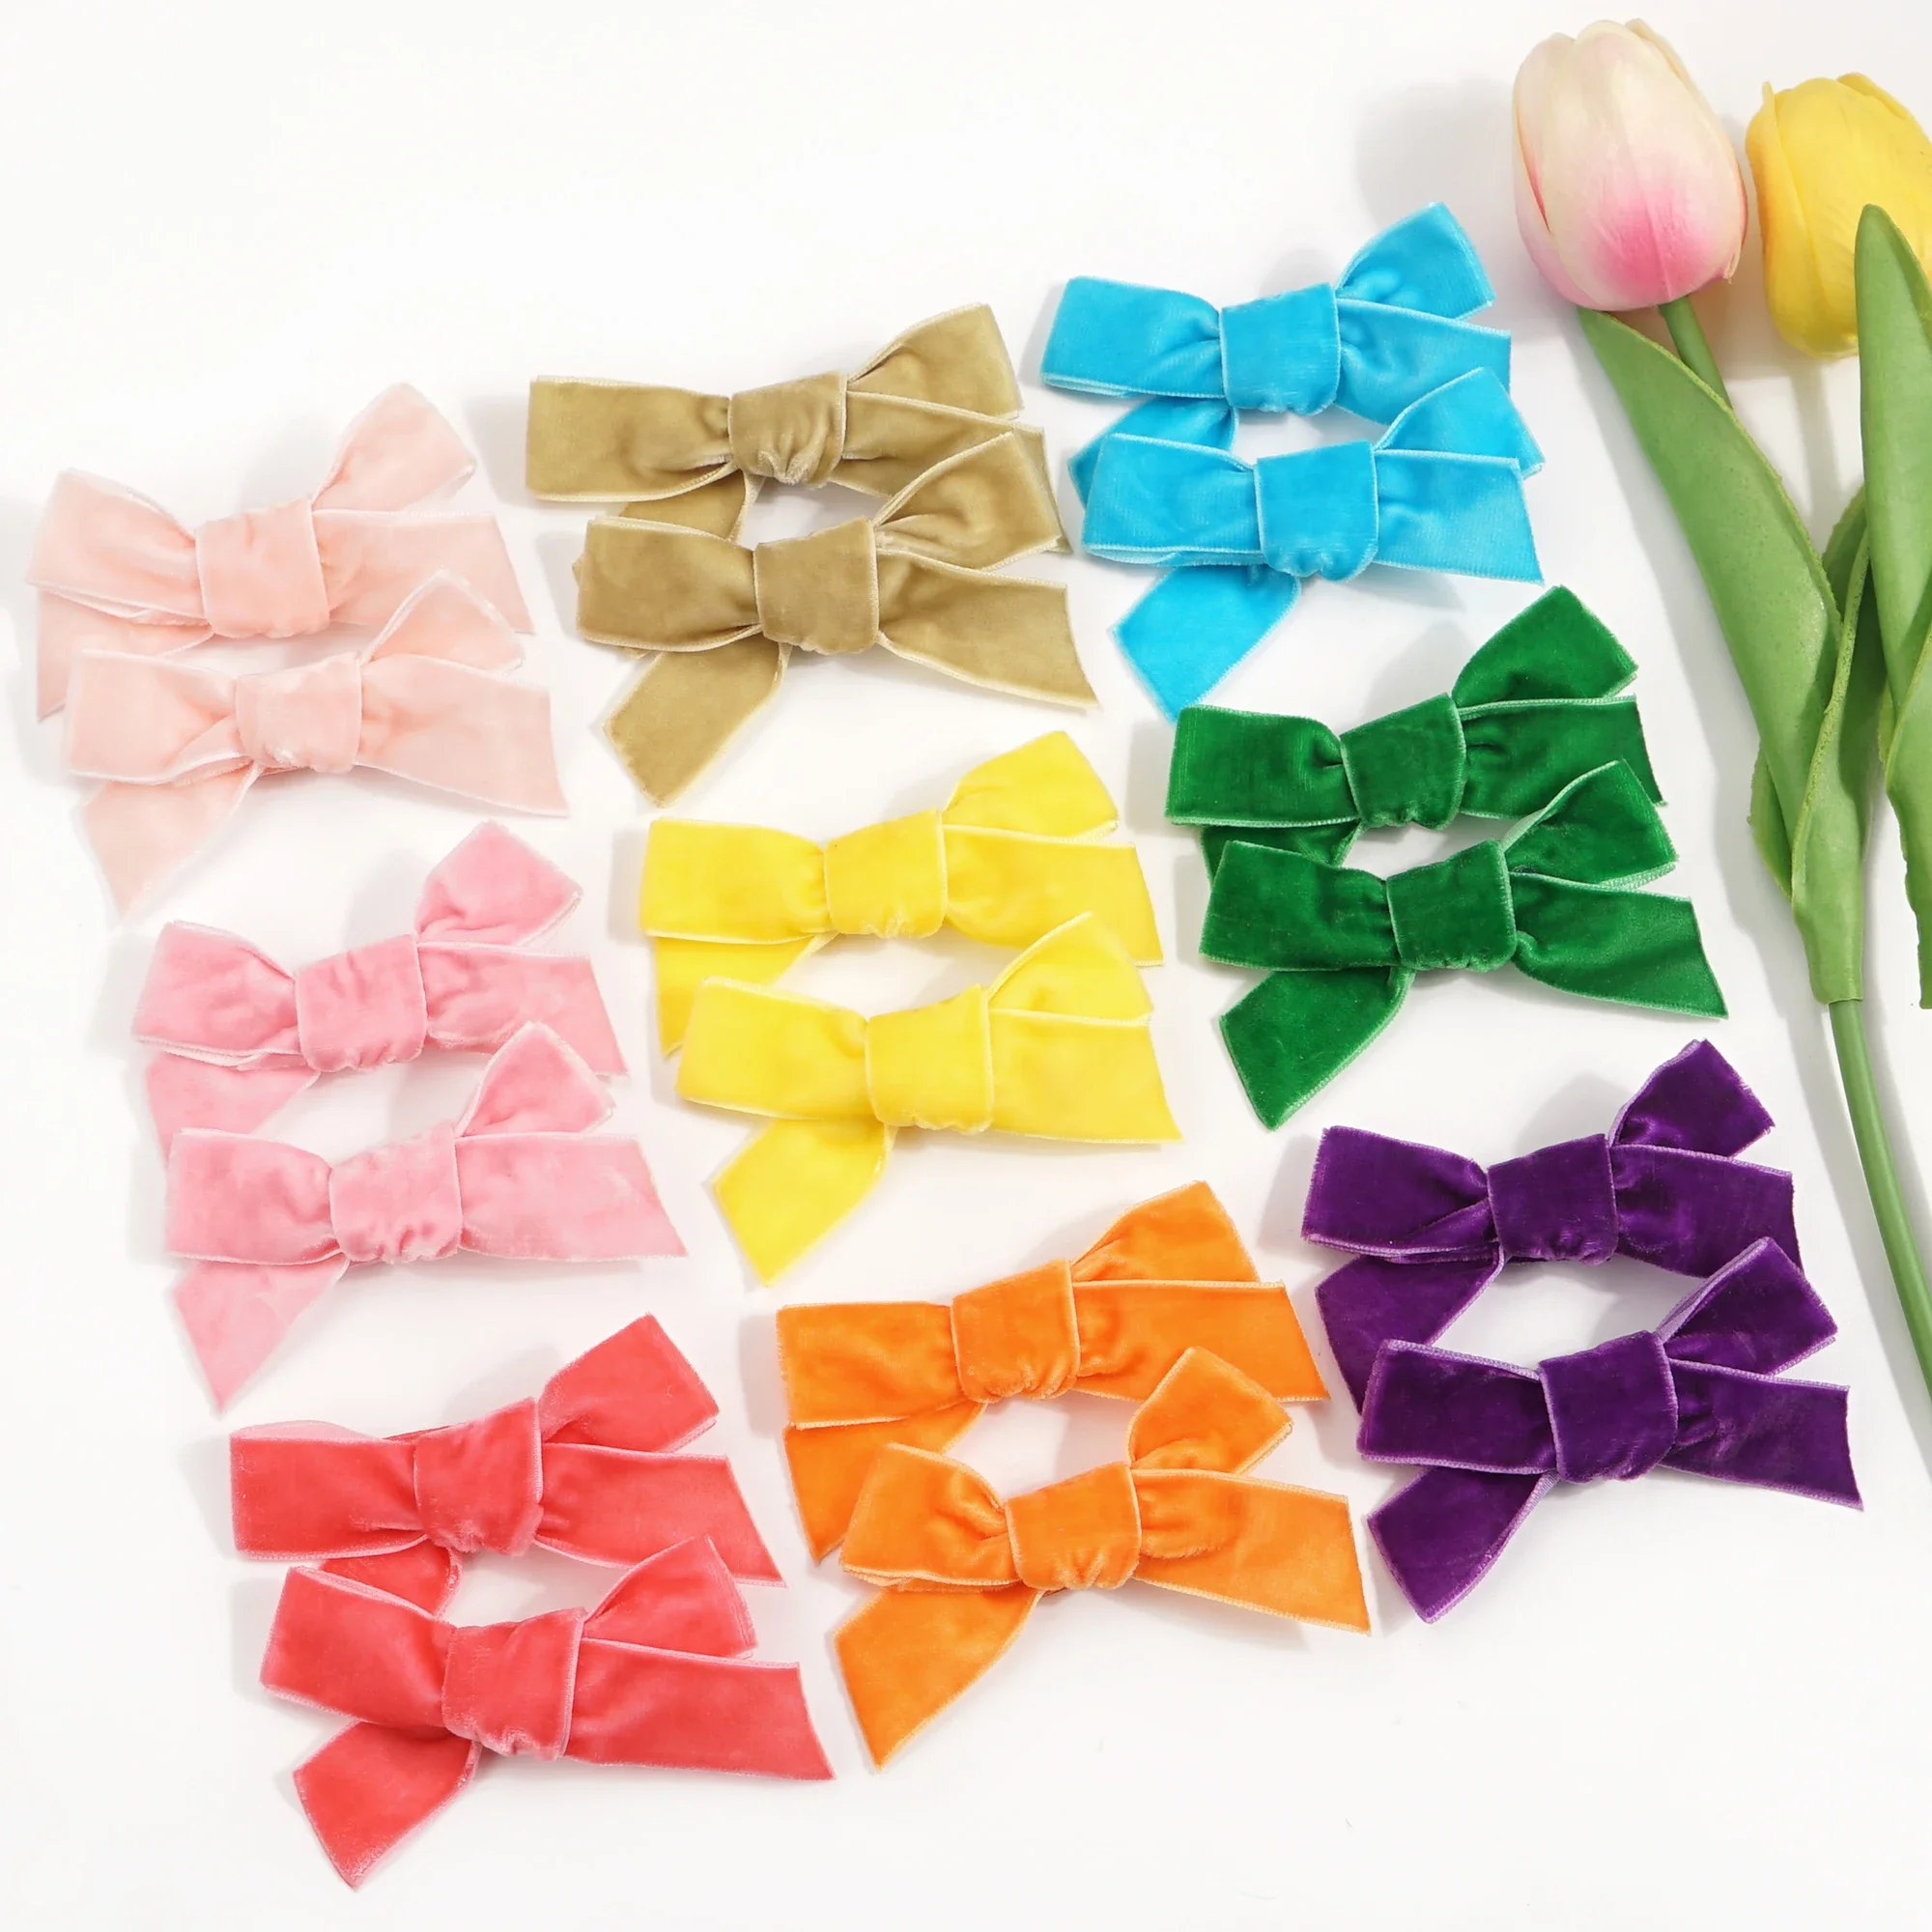 12PCS Baby Girls Hair Bows Clips 3.15inch Velvet Hair Bow Alligator Hair Clips Fully Lined Hair Accessories for Toddlers Kids